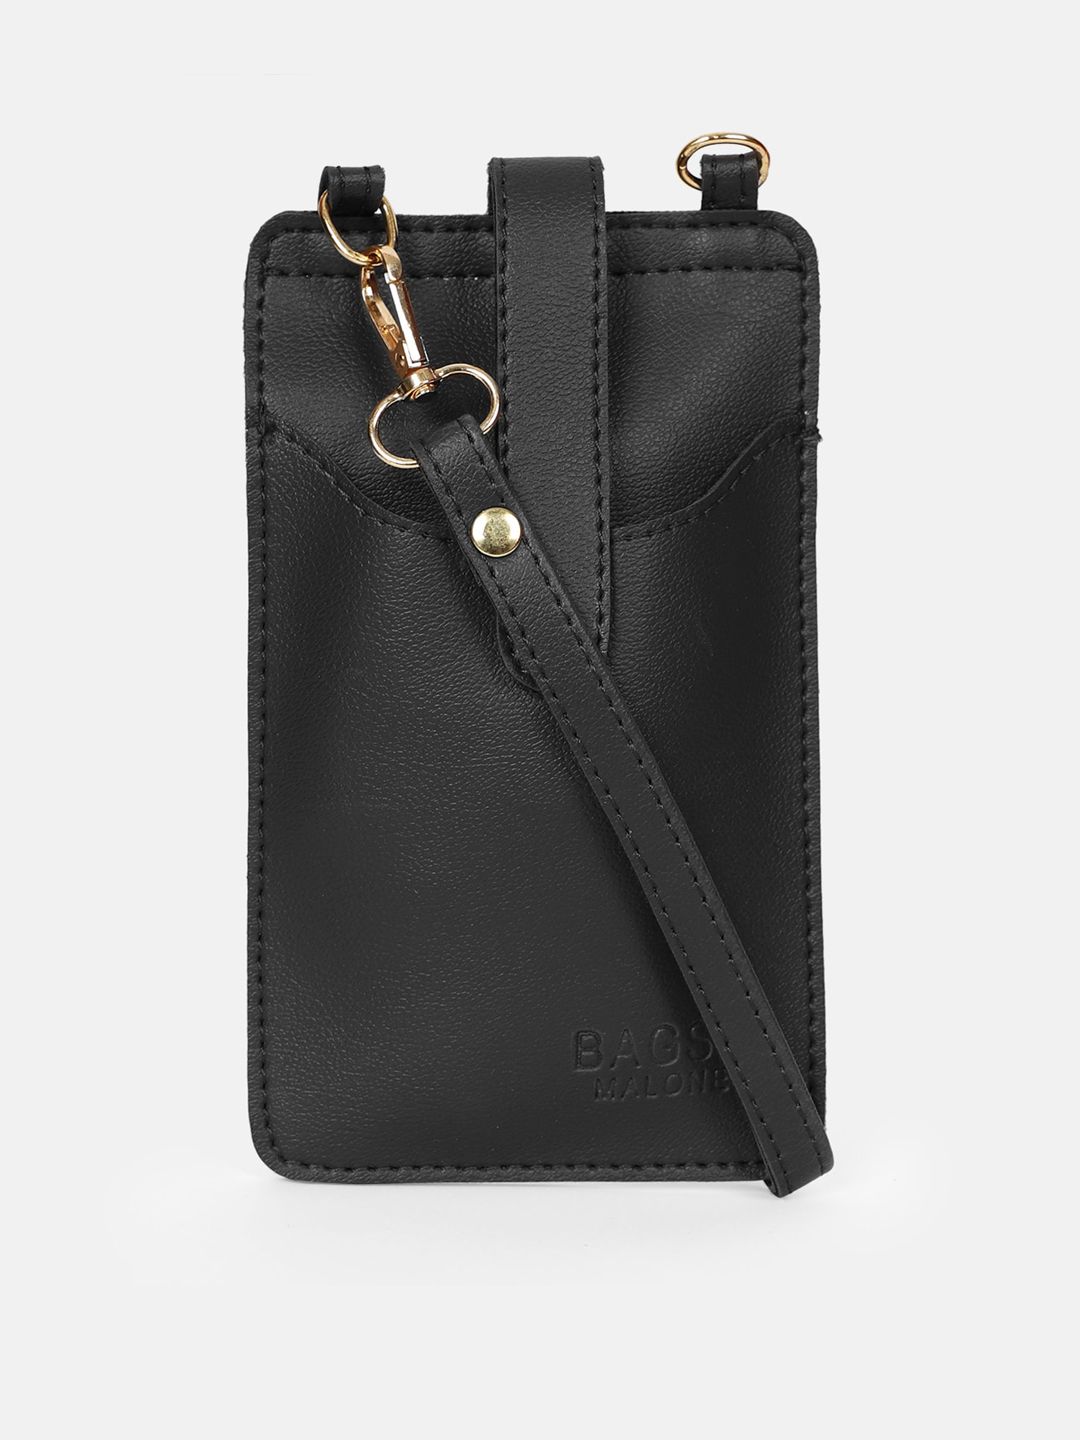 Bagsy Malone Black Structured Sling Bag Price in India